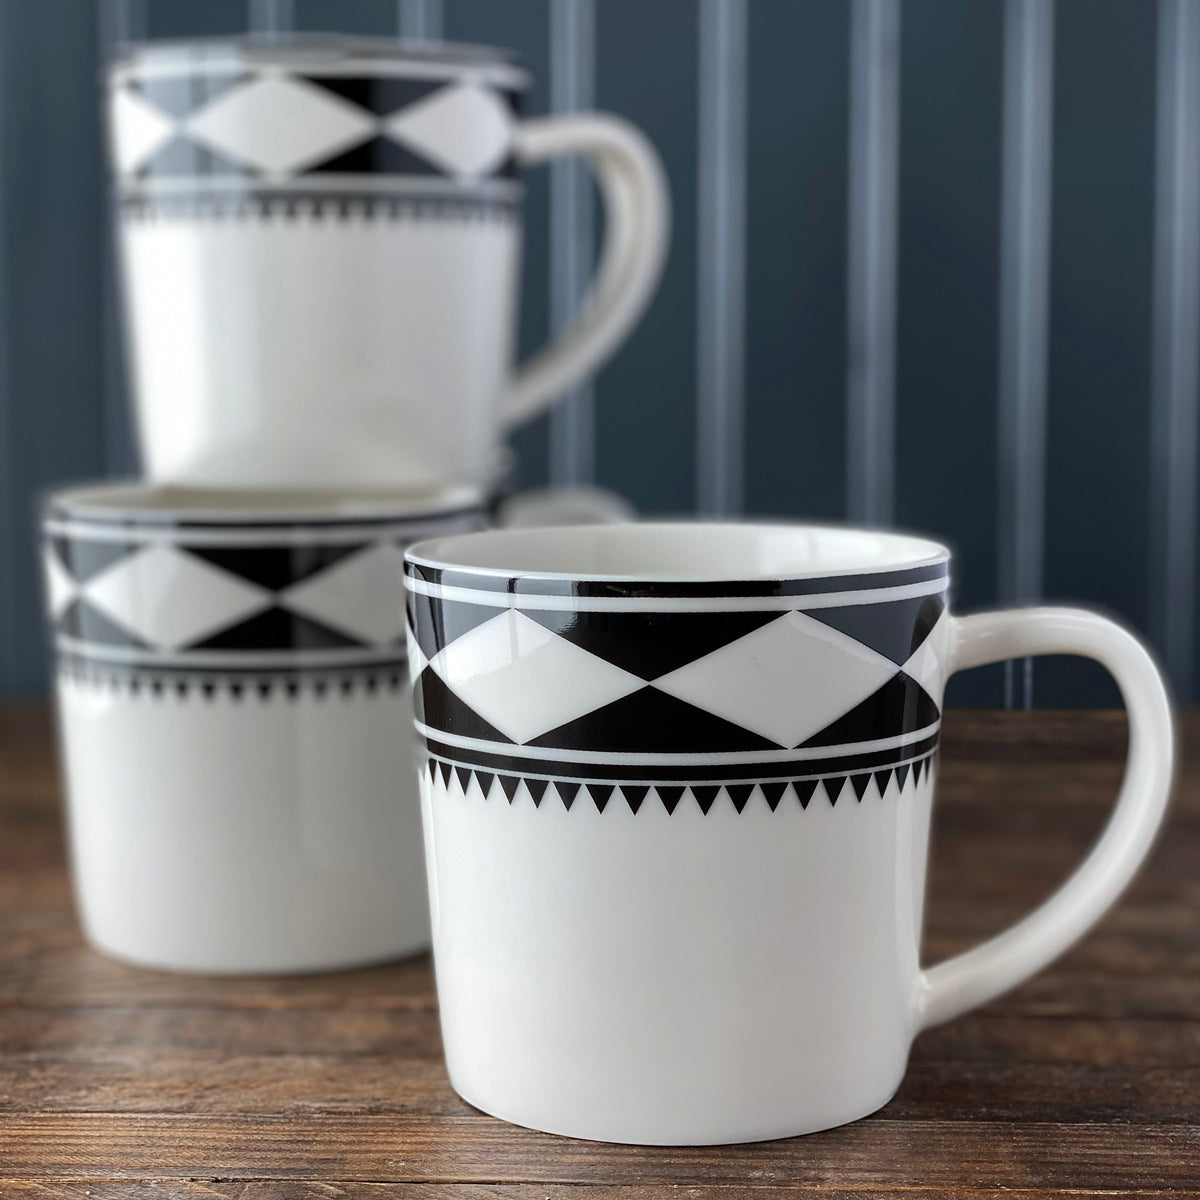 Three white Moroccan-inspired Fez Mugs by Caskata Artisanal Home with black geometric patterns, one in the foreground and two stacked in the background, placed on a wooden surface with a dark striped background. These high-fired porcelain mugs are both dishwasher and microwave safe.